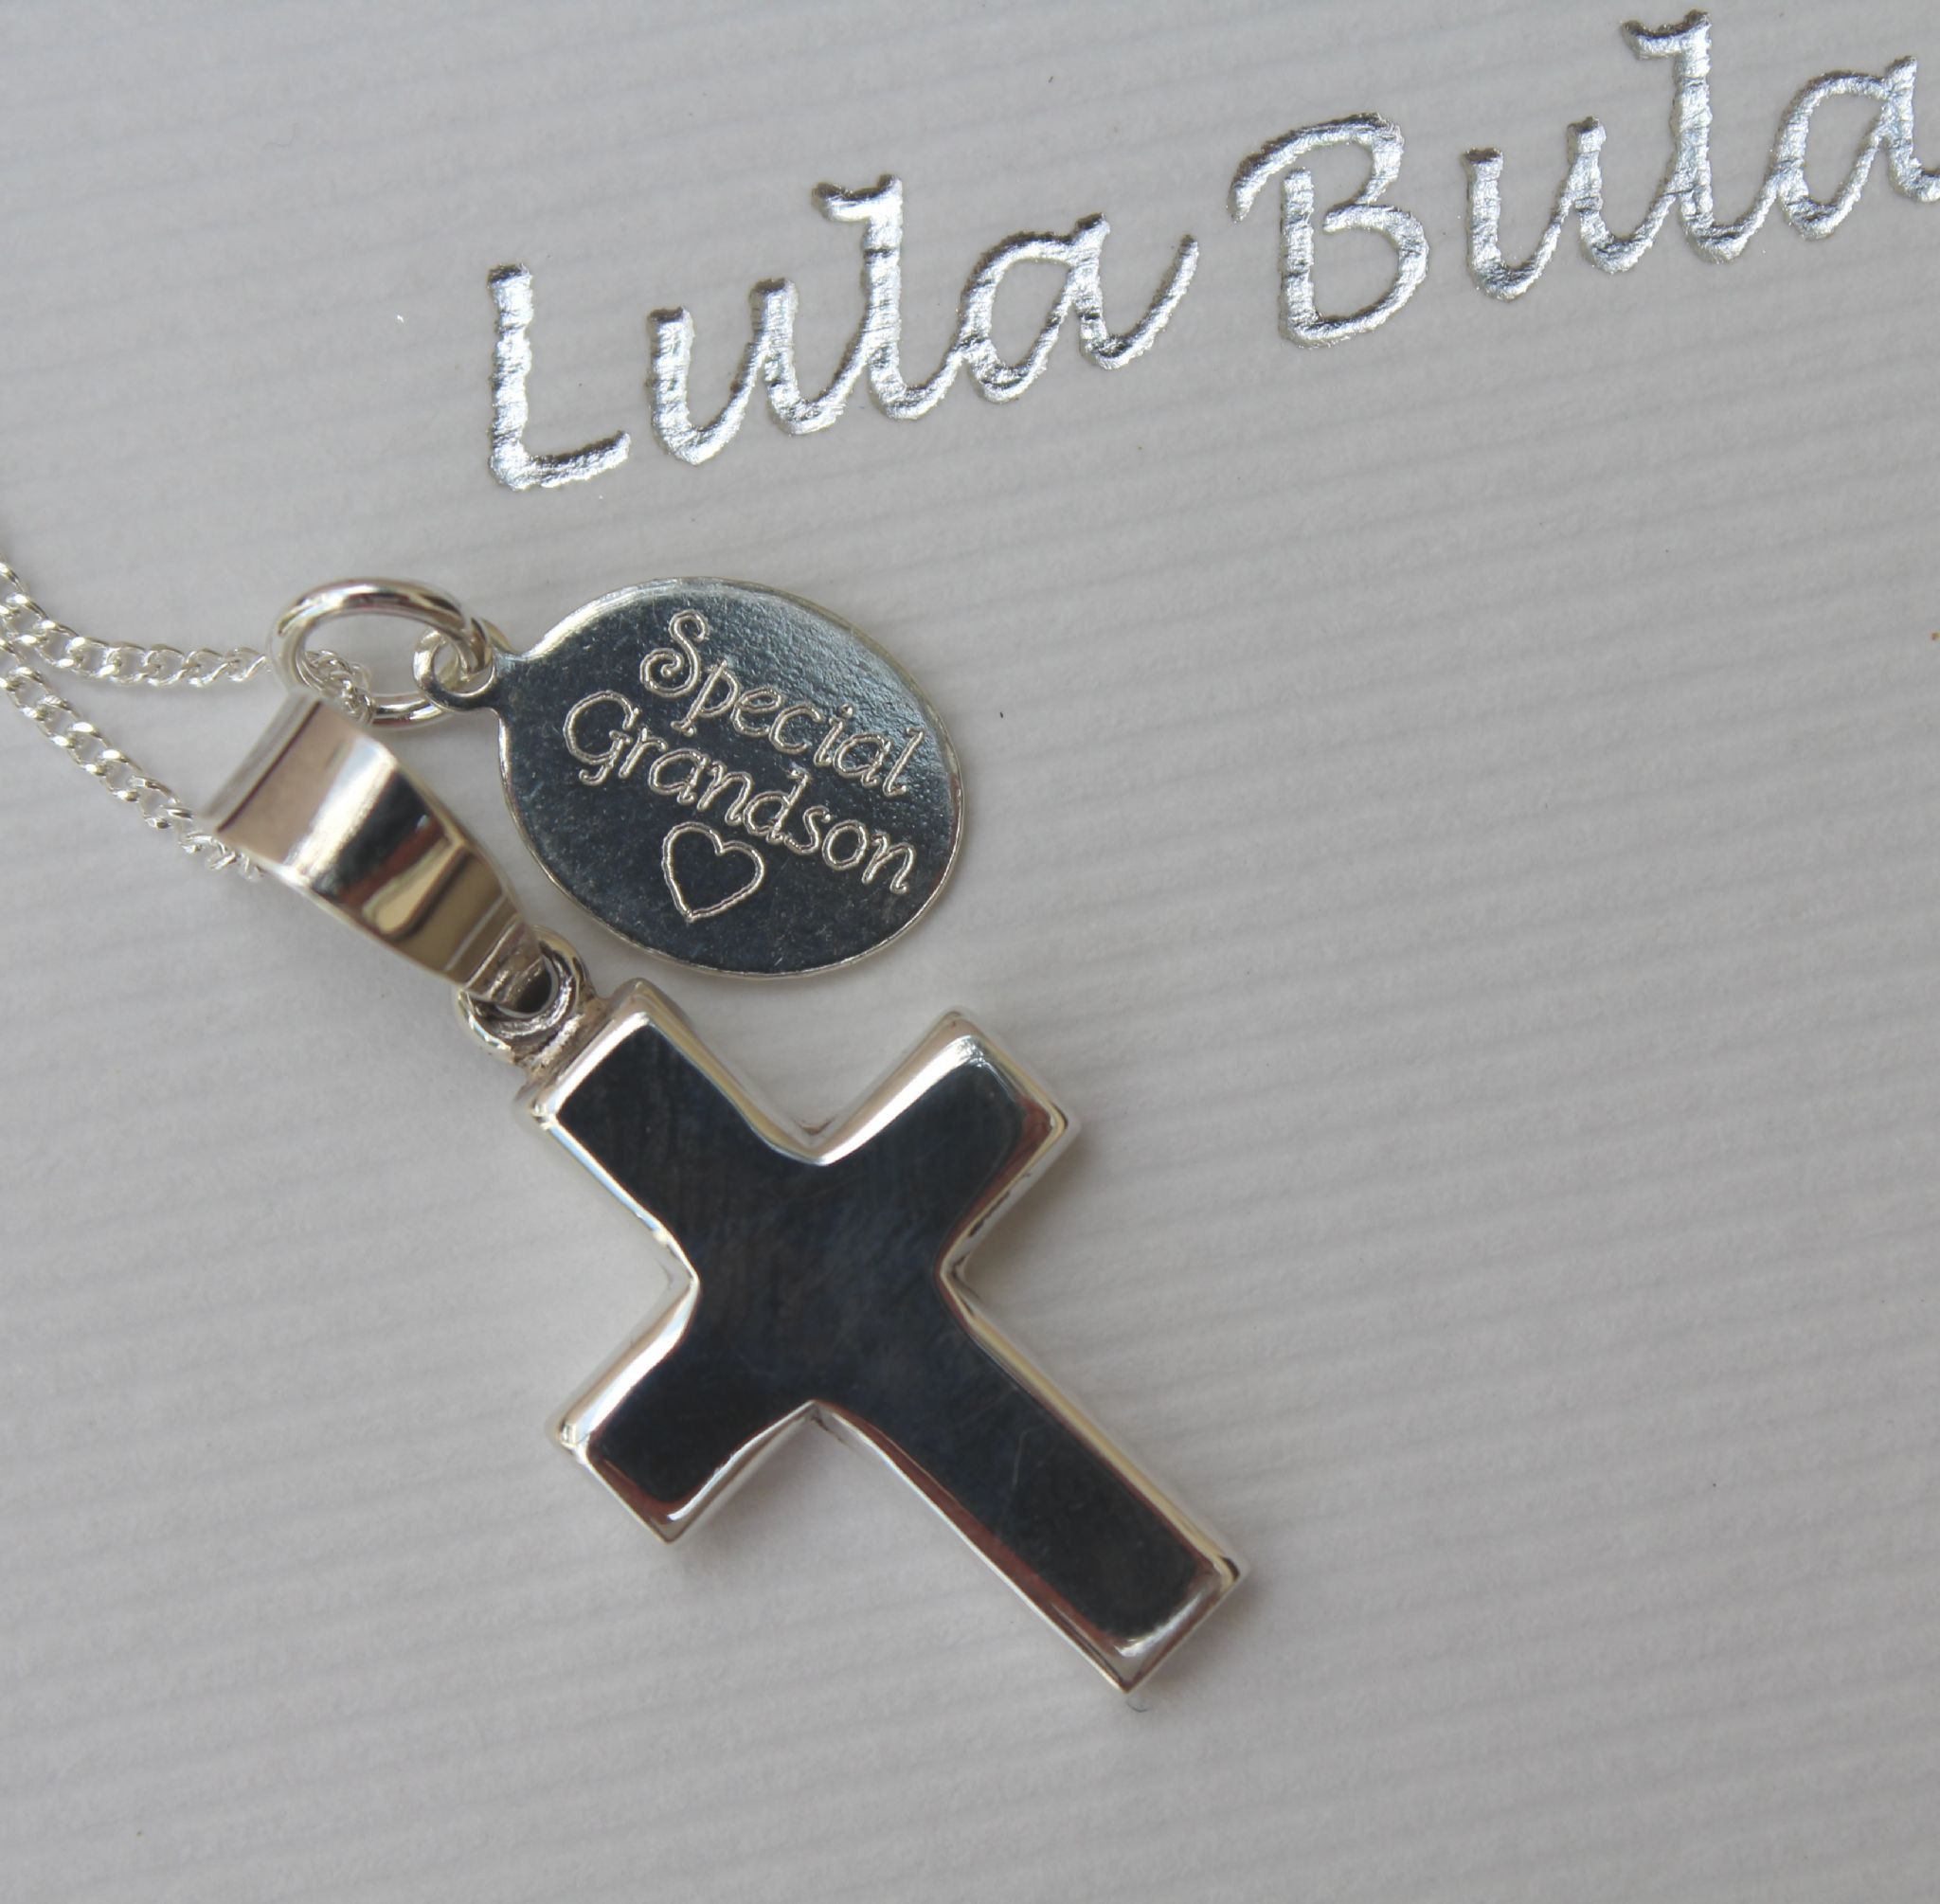 1St Communion Gift Ideas For Boys
 The 23 Best Ideas for Boys First munion Gift Ideas